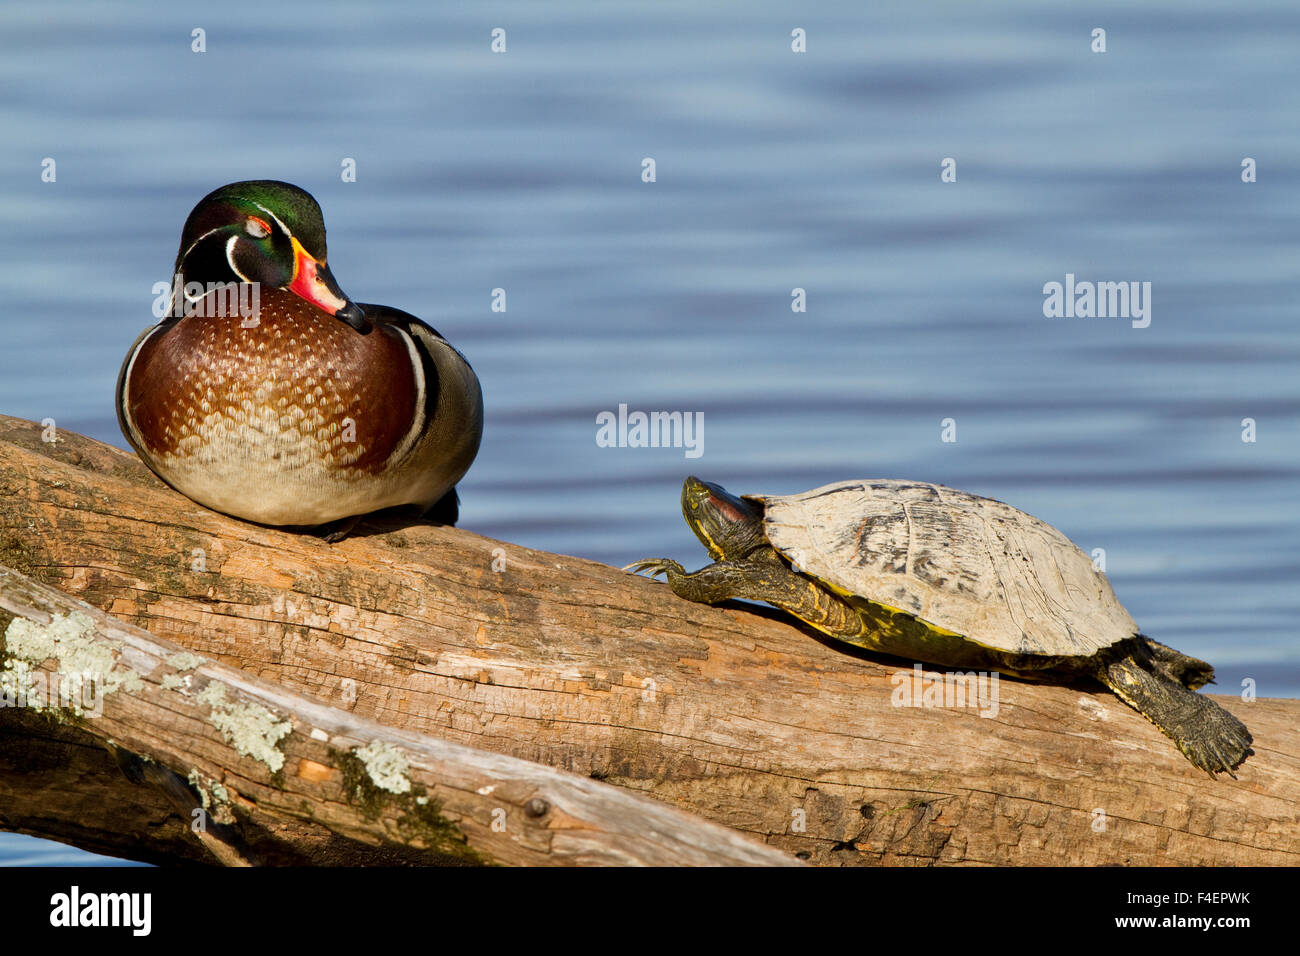 Wood Duck (Aix sponsa) male and Slider turtle (Trachemys scripta) sitting on log in wetland, Marion, Illinois, USA. Stock Photo